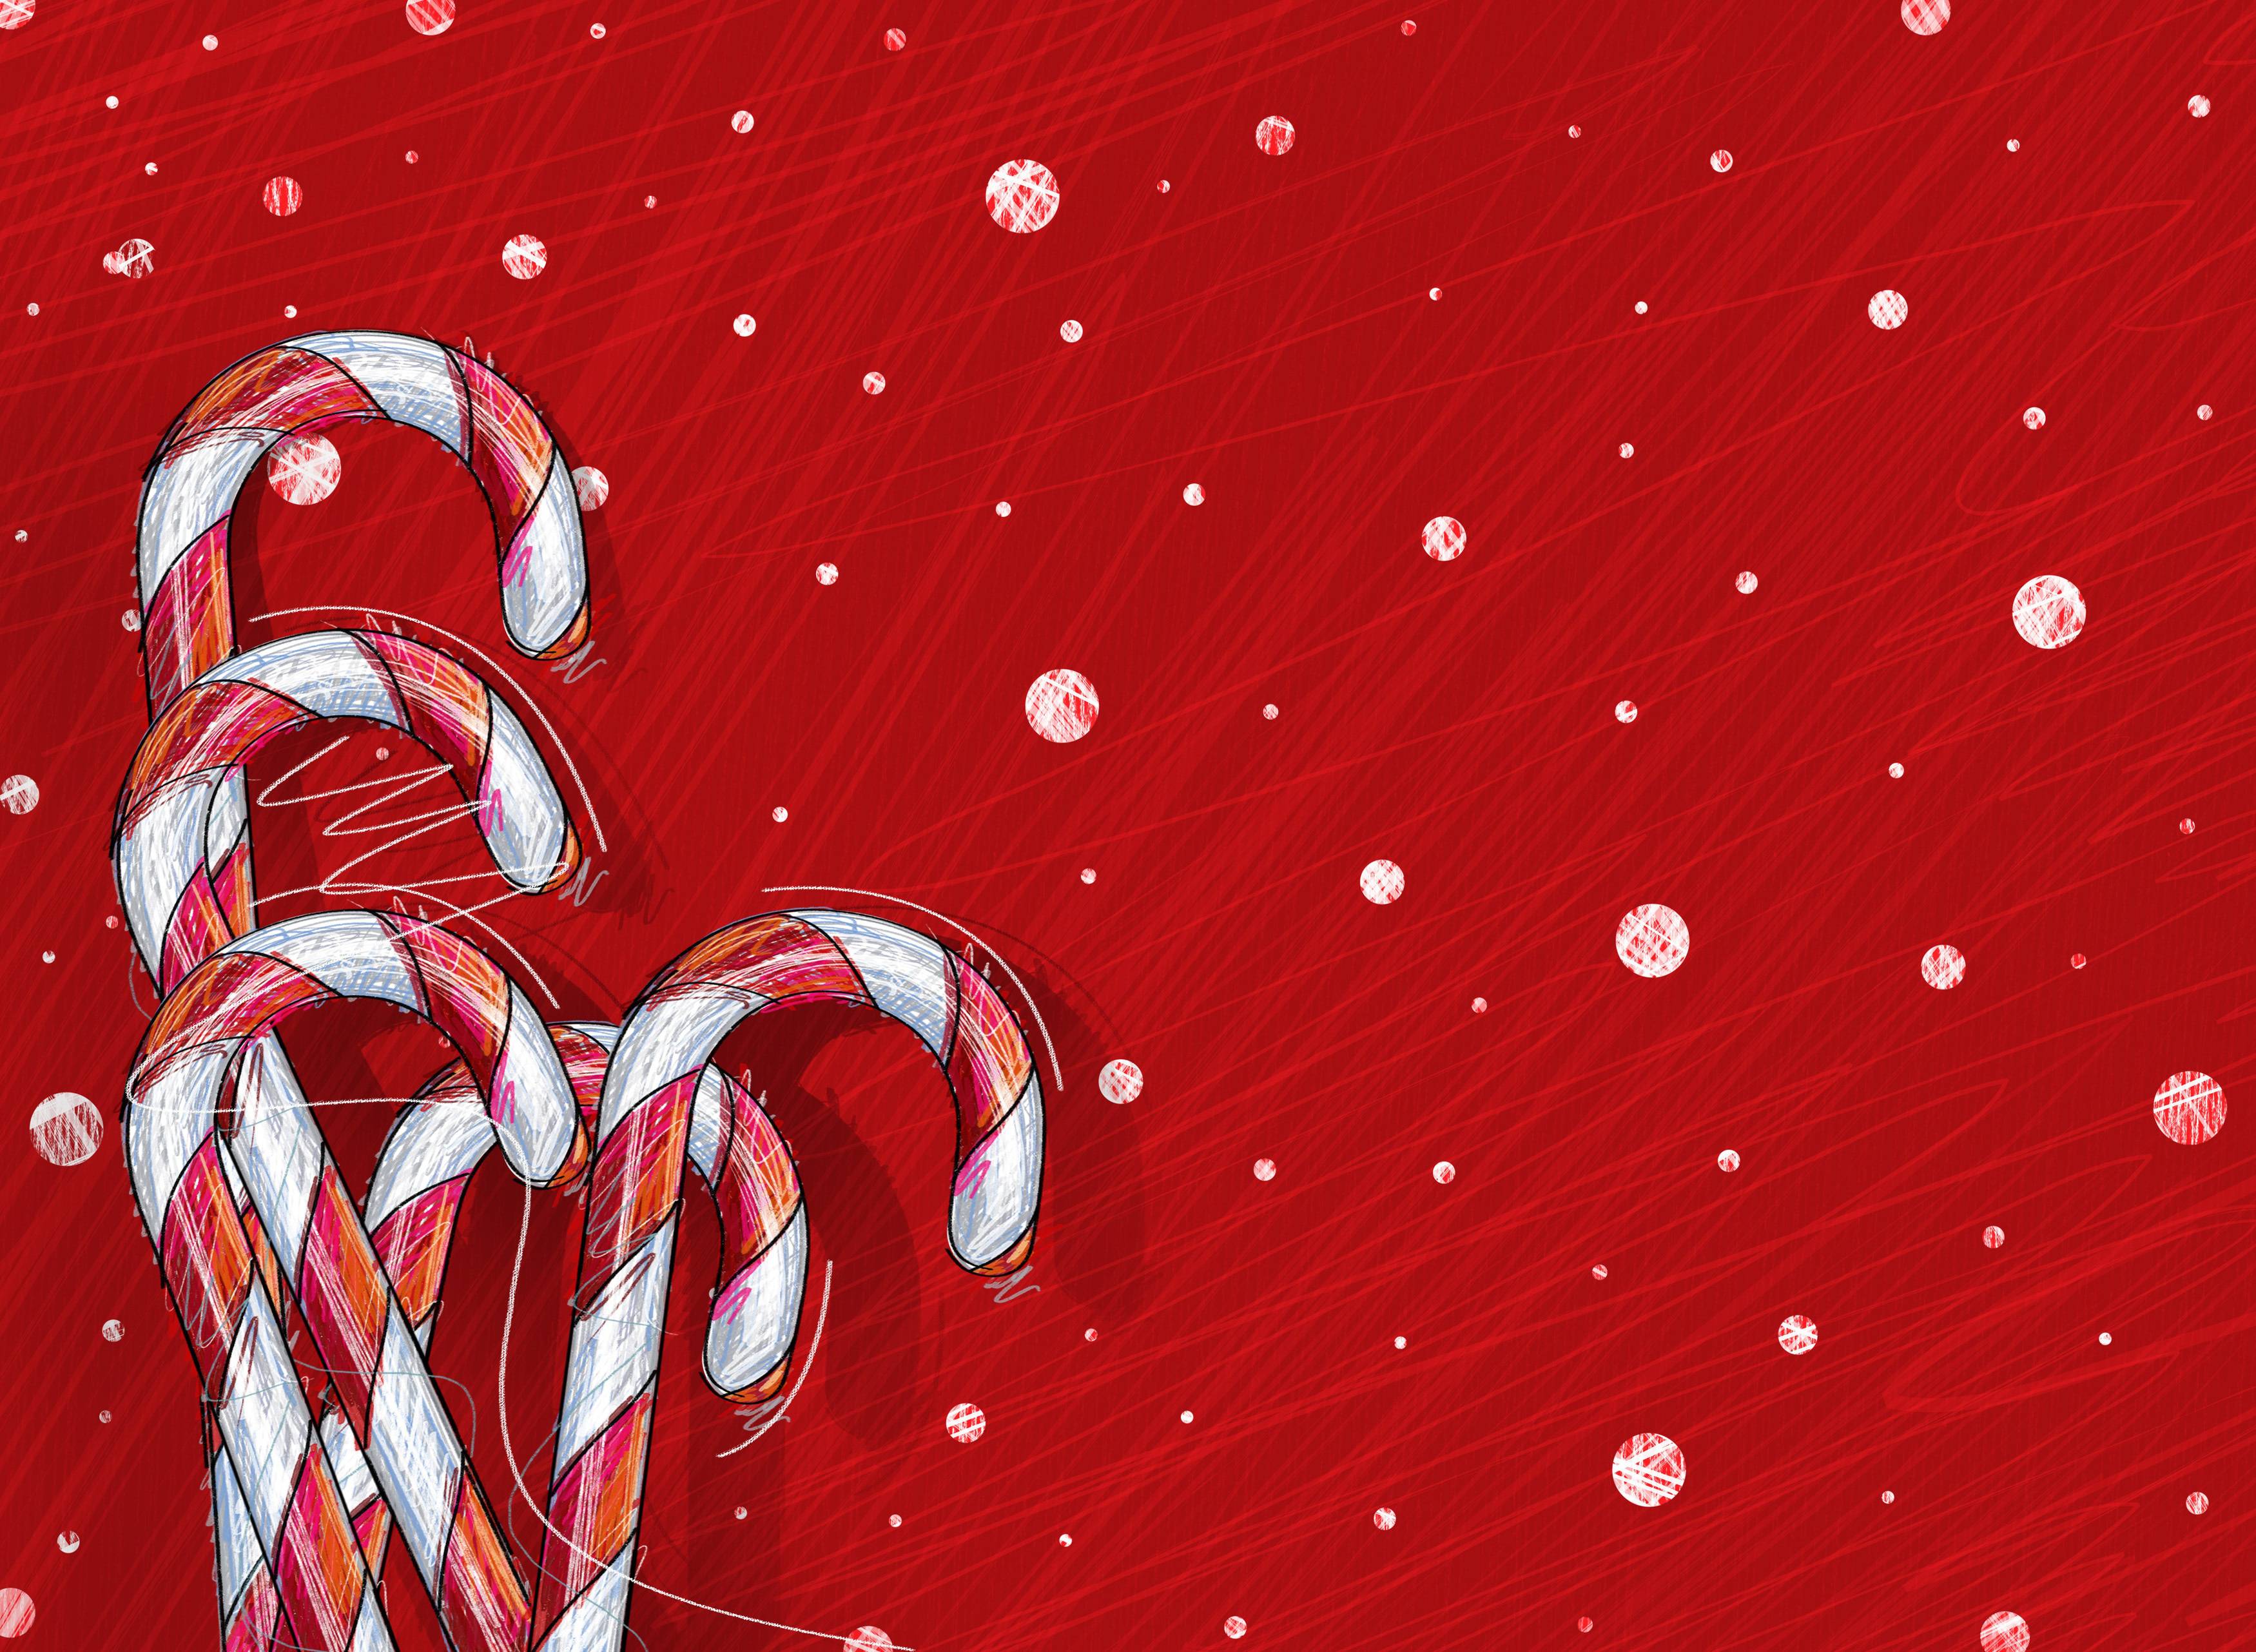 Holiday Puter Background